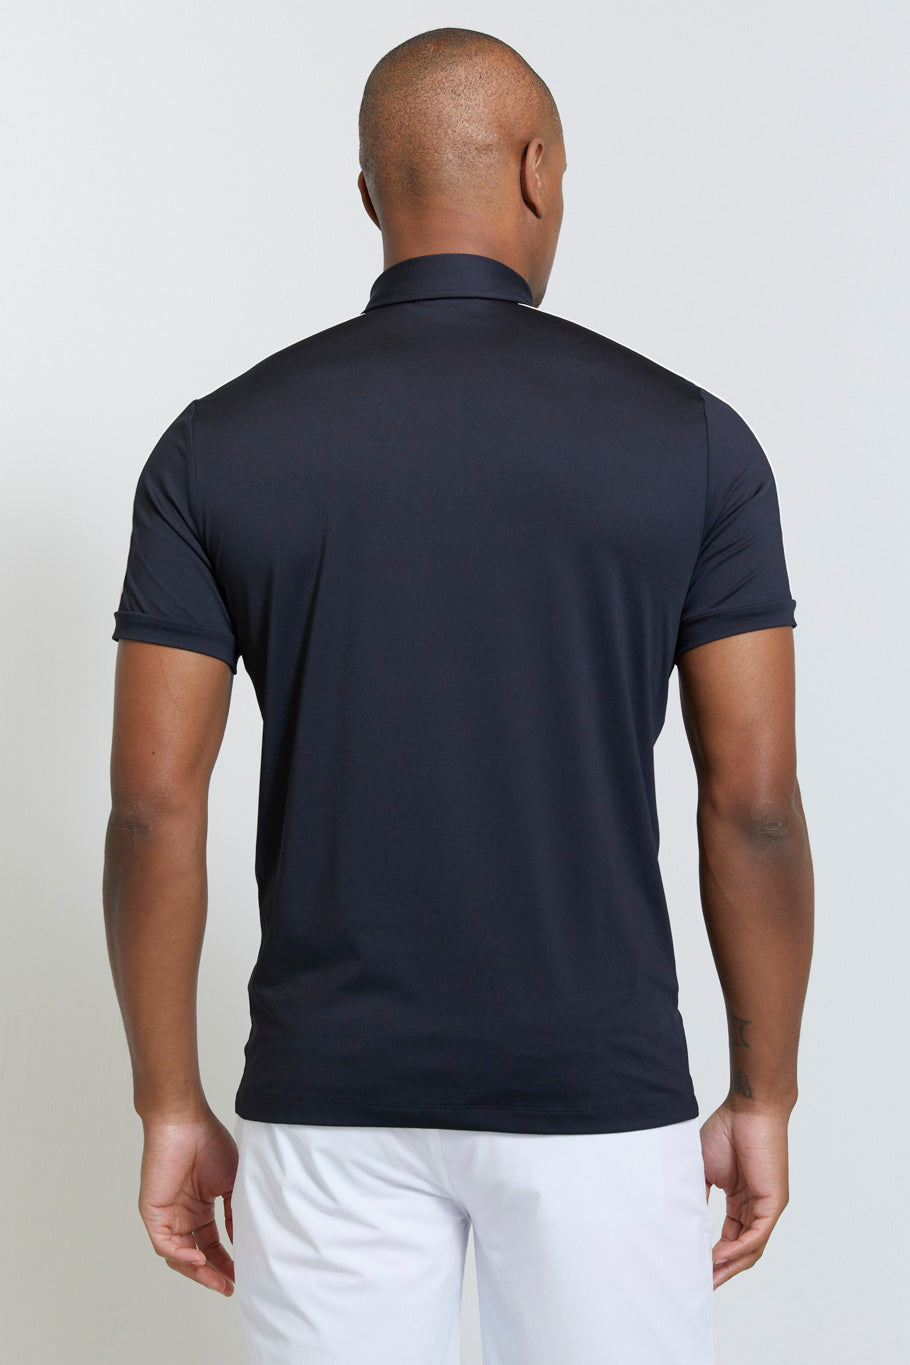 Image of the evans polo in tuxedo